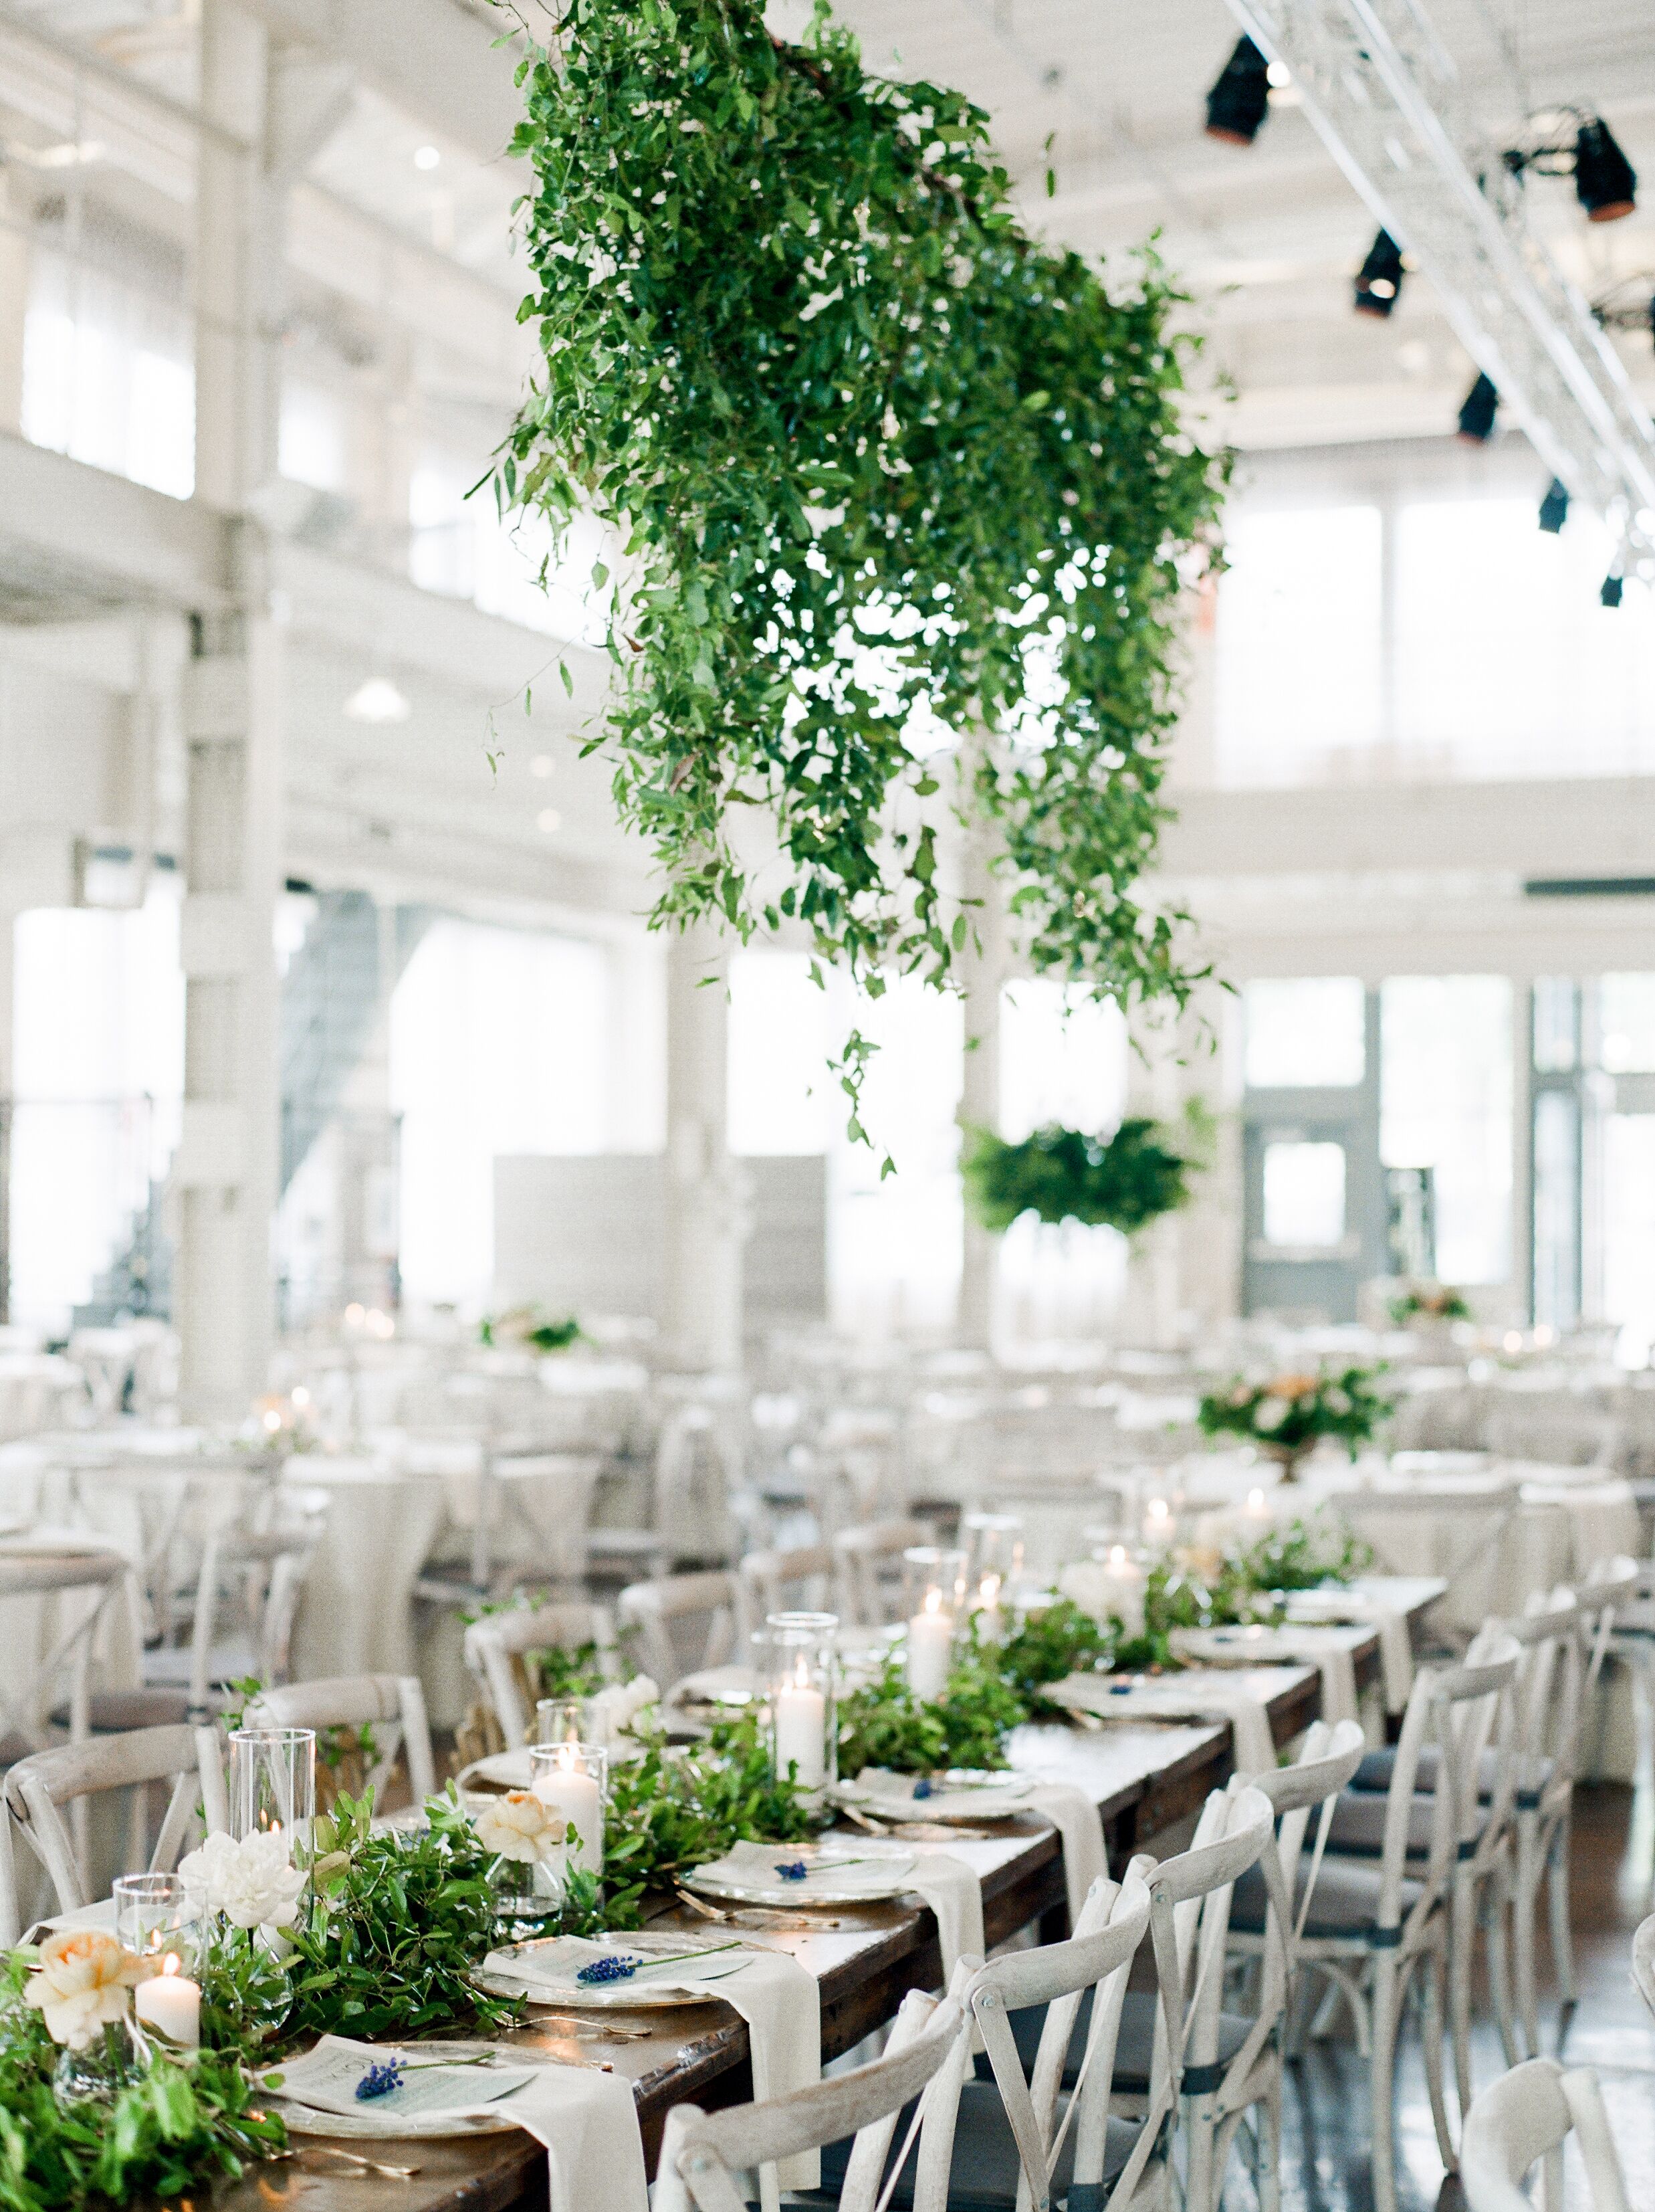 Hanging Greenery Installation in Industrial Reception Space